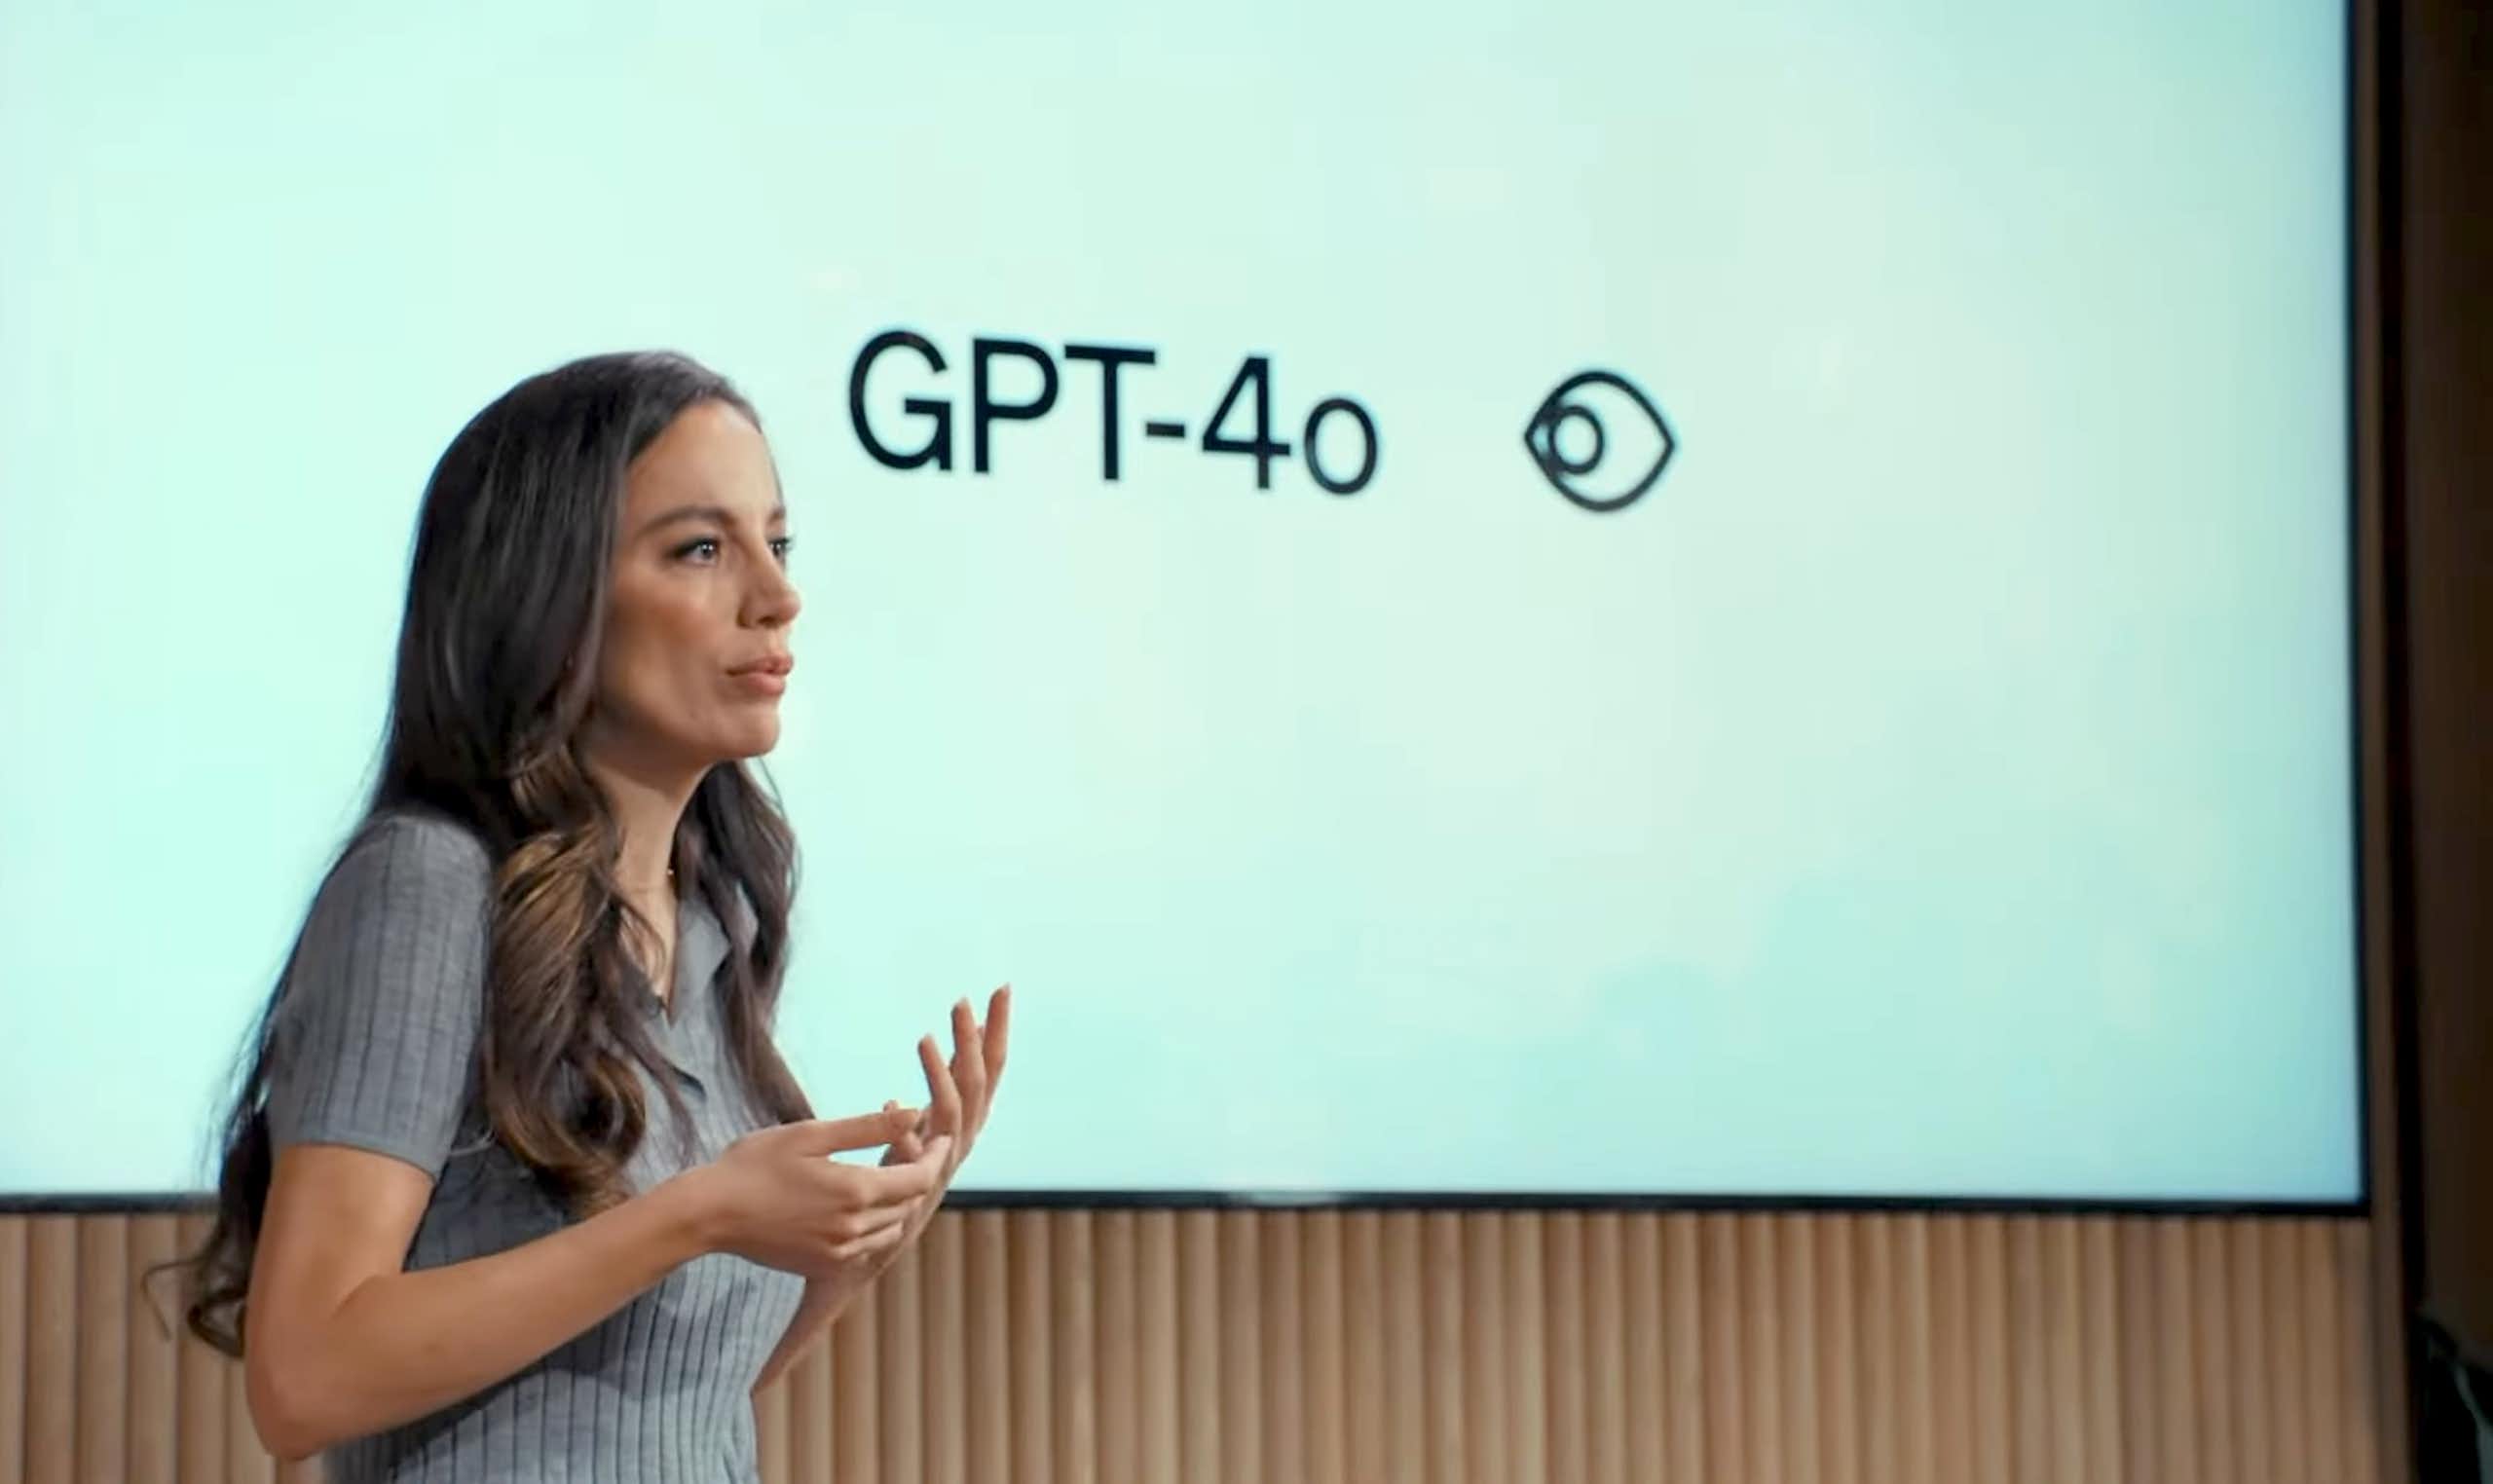 A photo of a woman talking in front of a screen showing 'GPT-4o'.